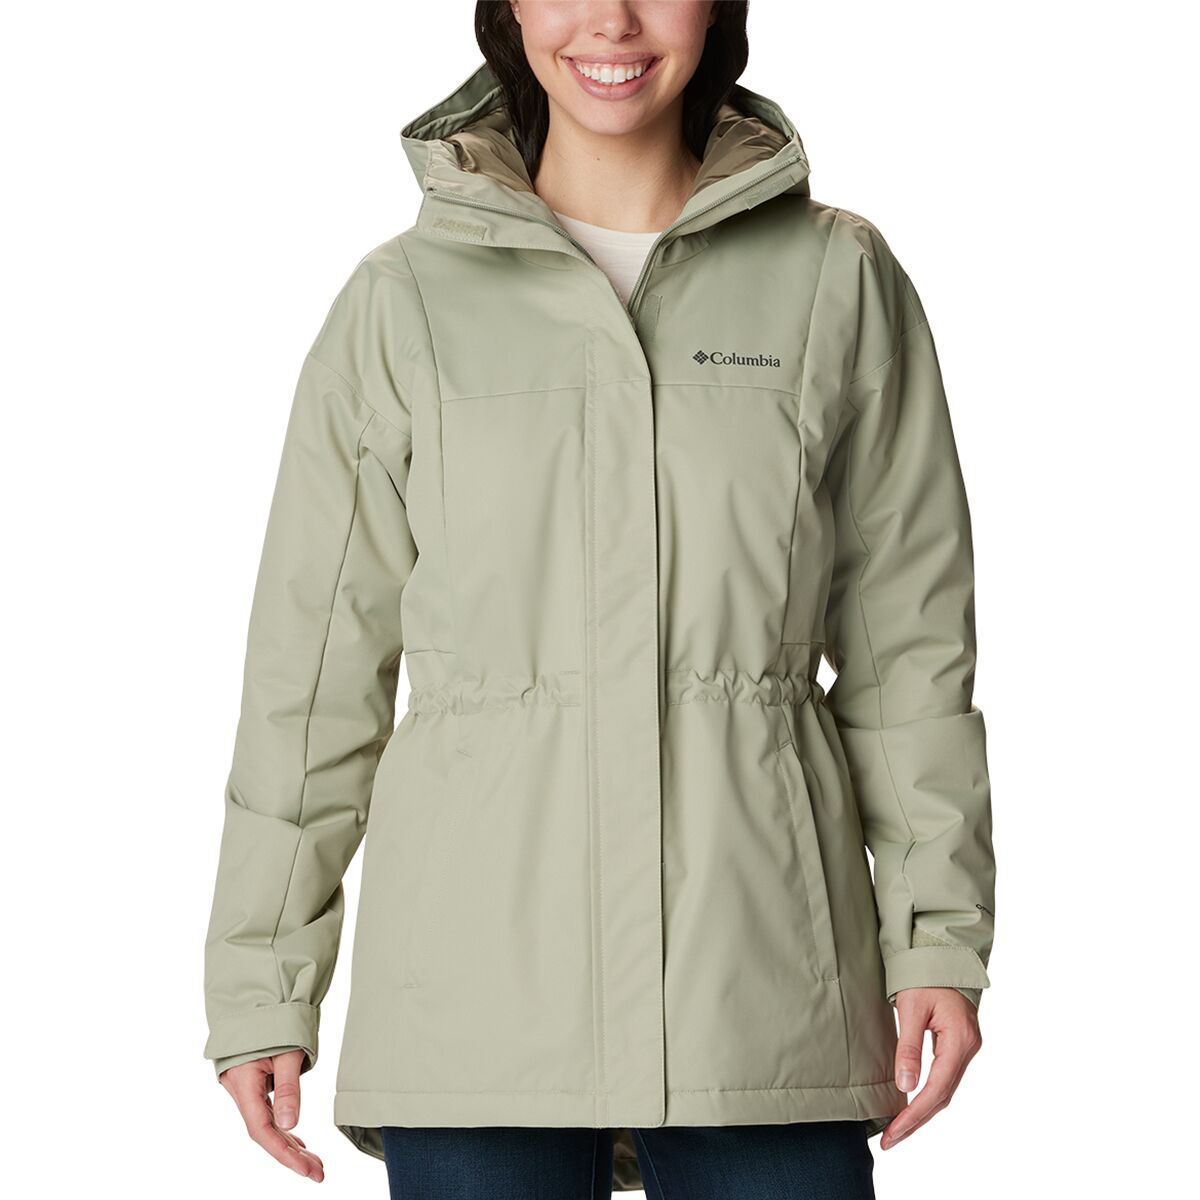 Hikebound Long Insulated Jacket - Women